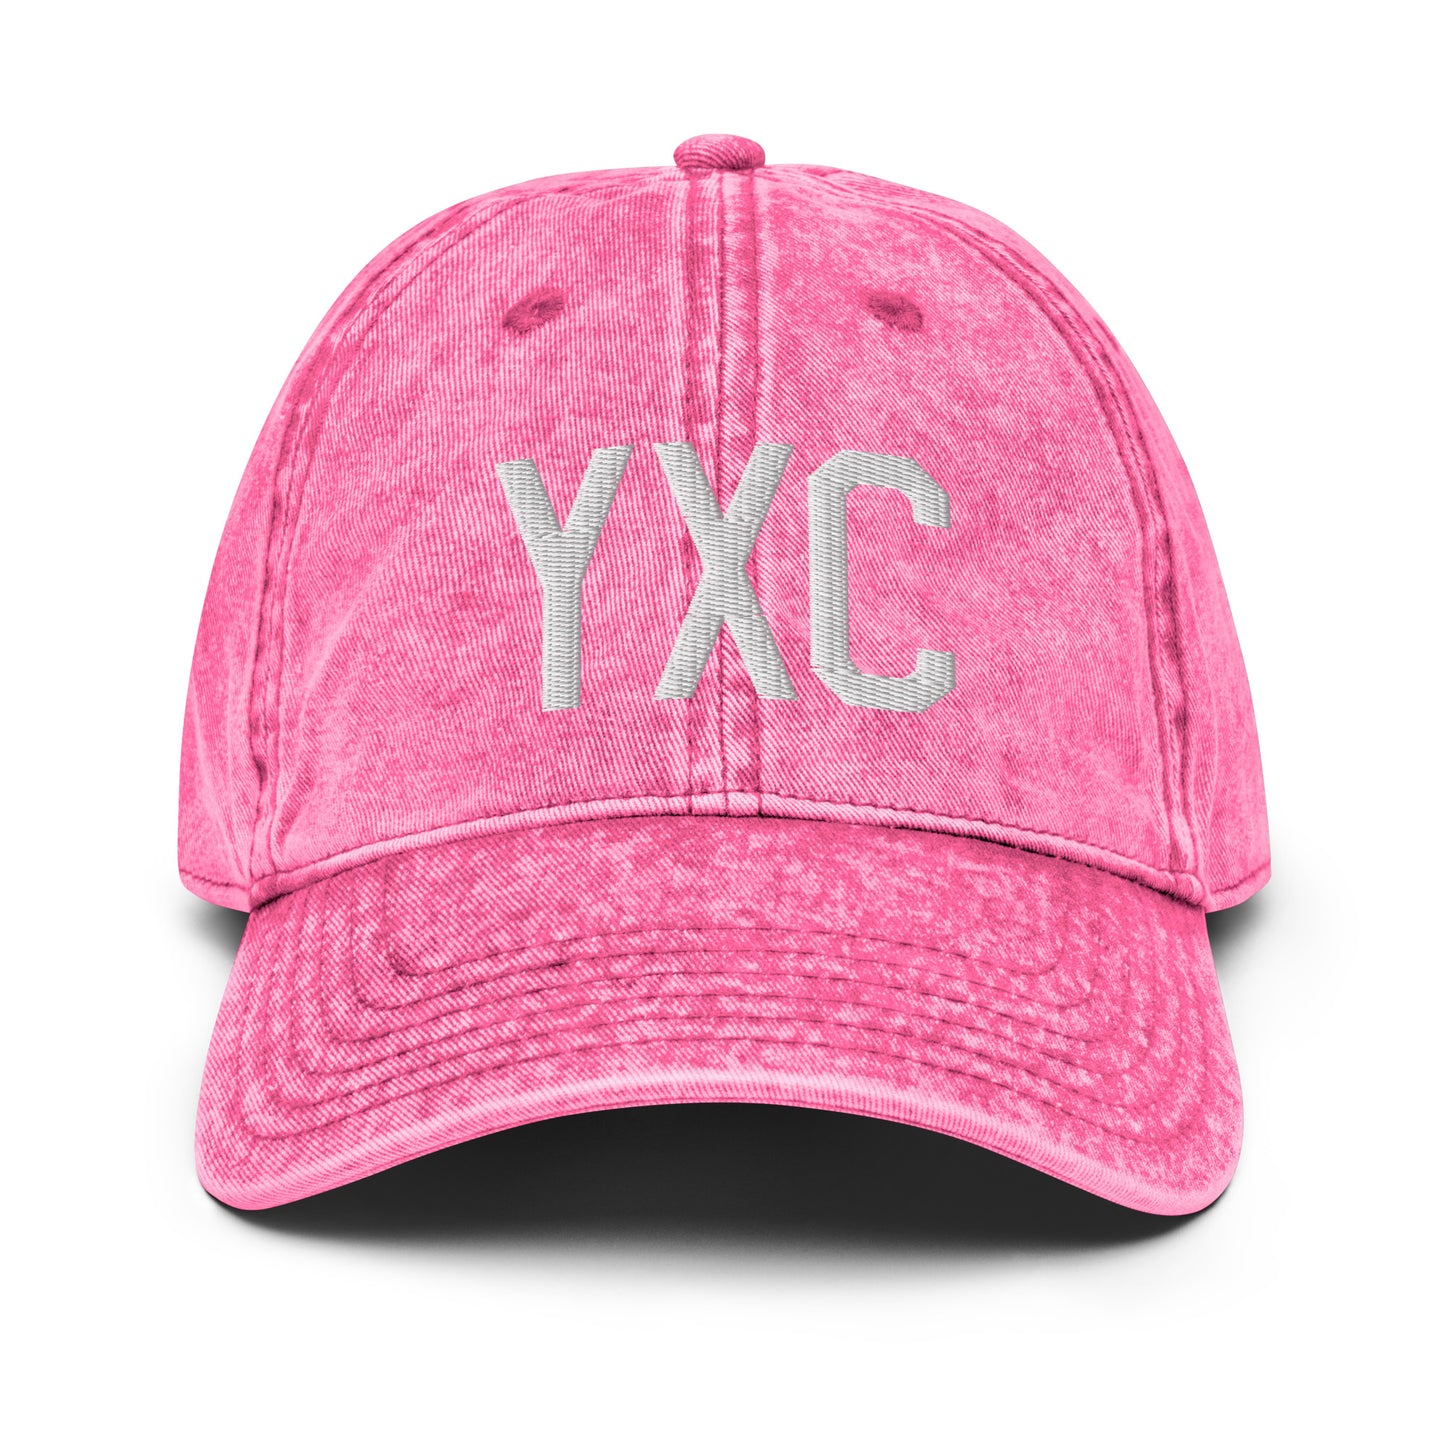 Airport Code Twill Cap - White • YXC Cranbrook • YHM Designs - Image 25